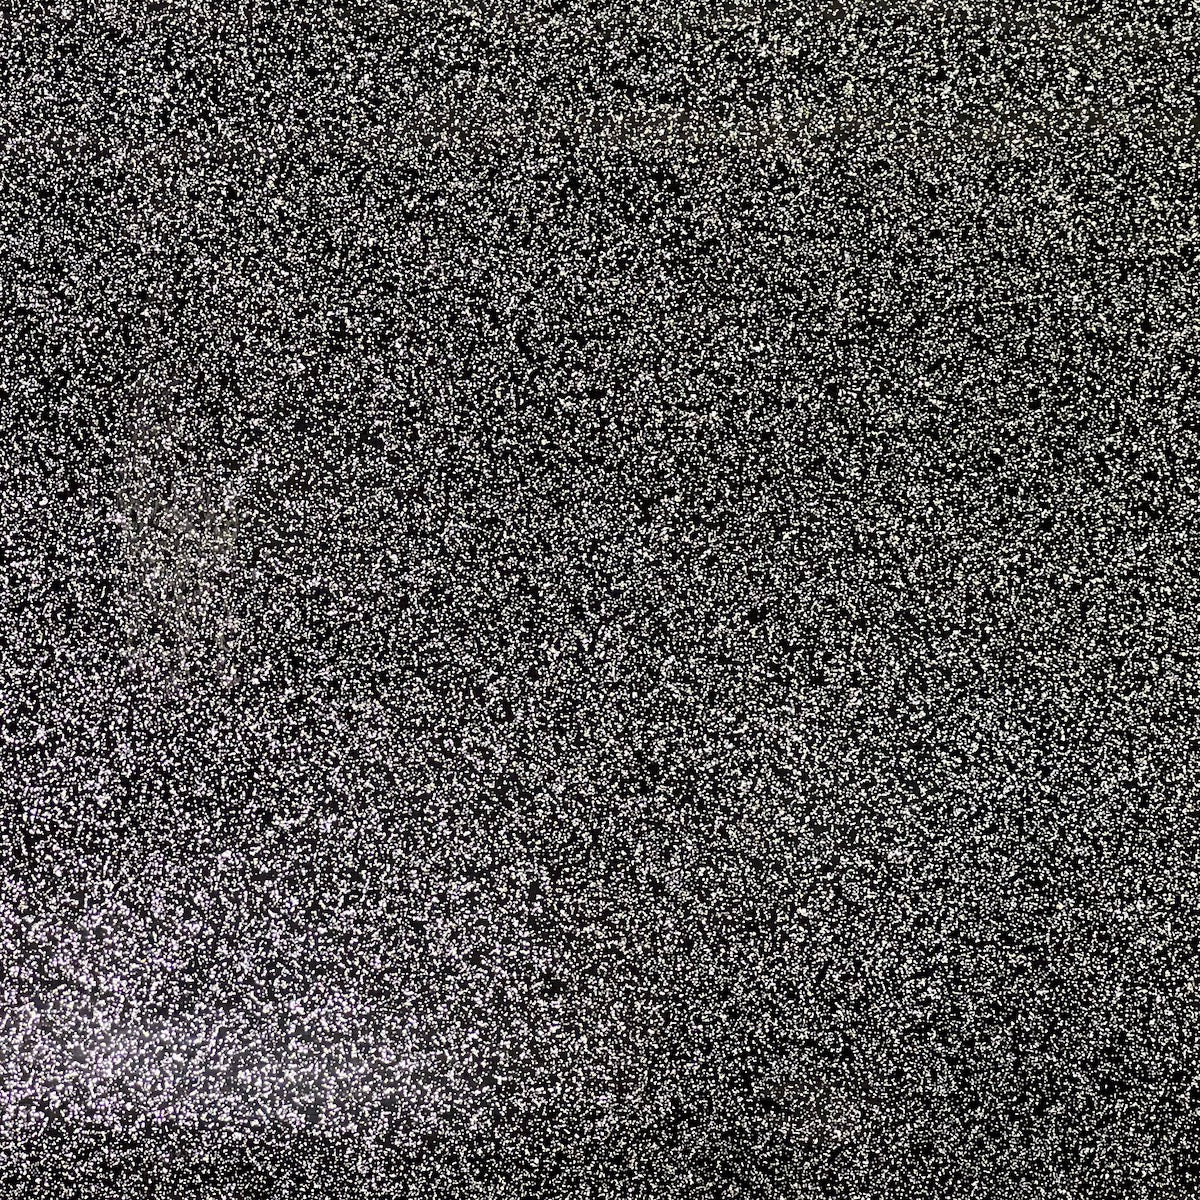 Black High Gloss Glitter + Sparkle Vinyl Upholstery Fabric By The